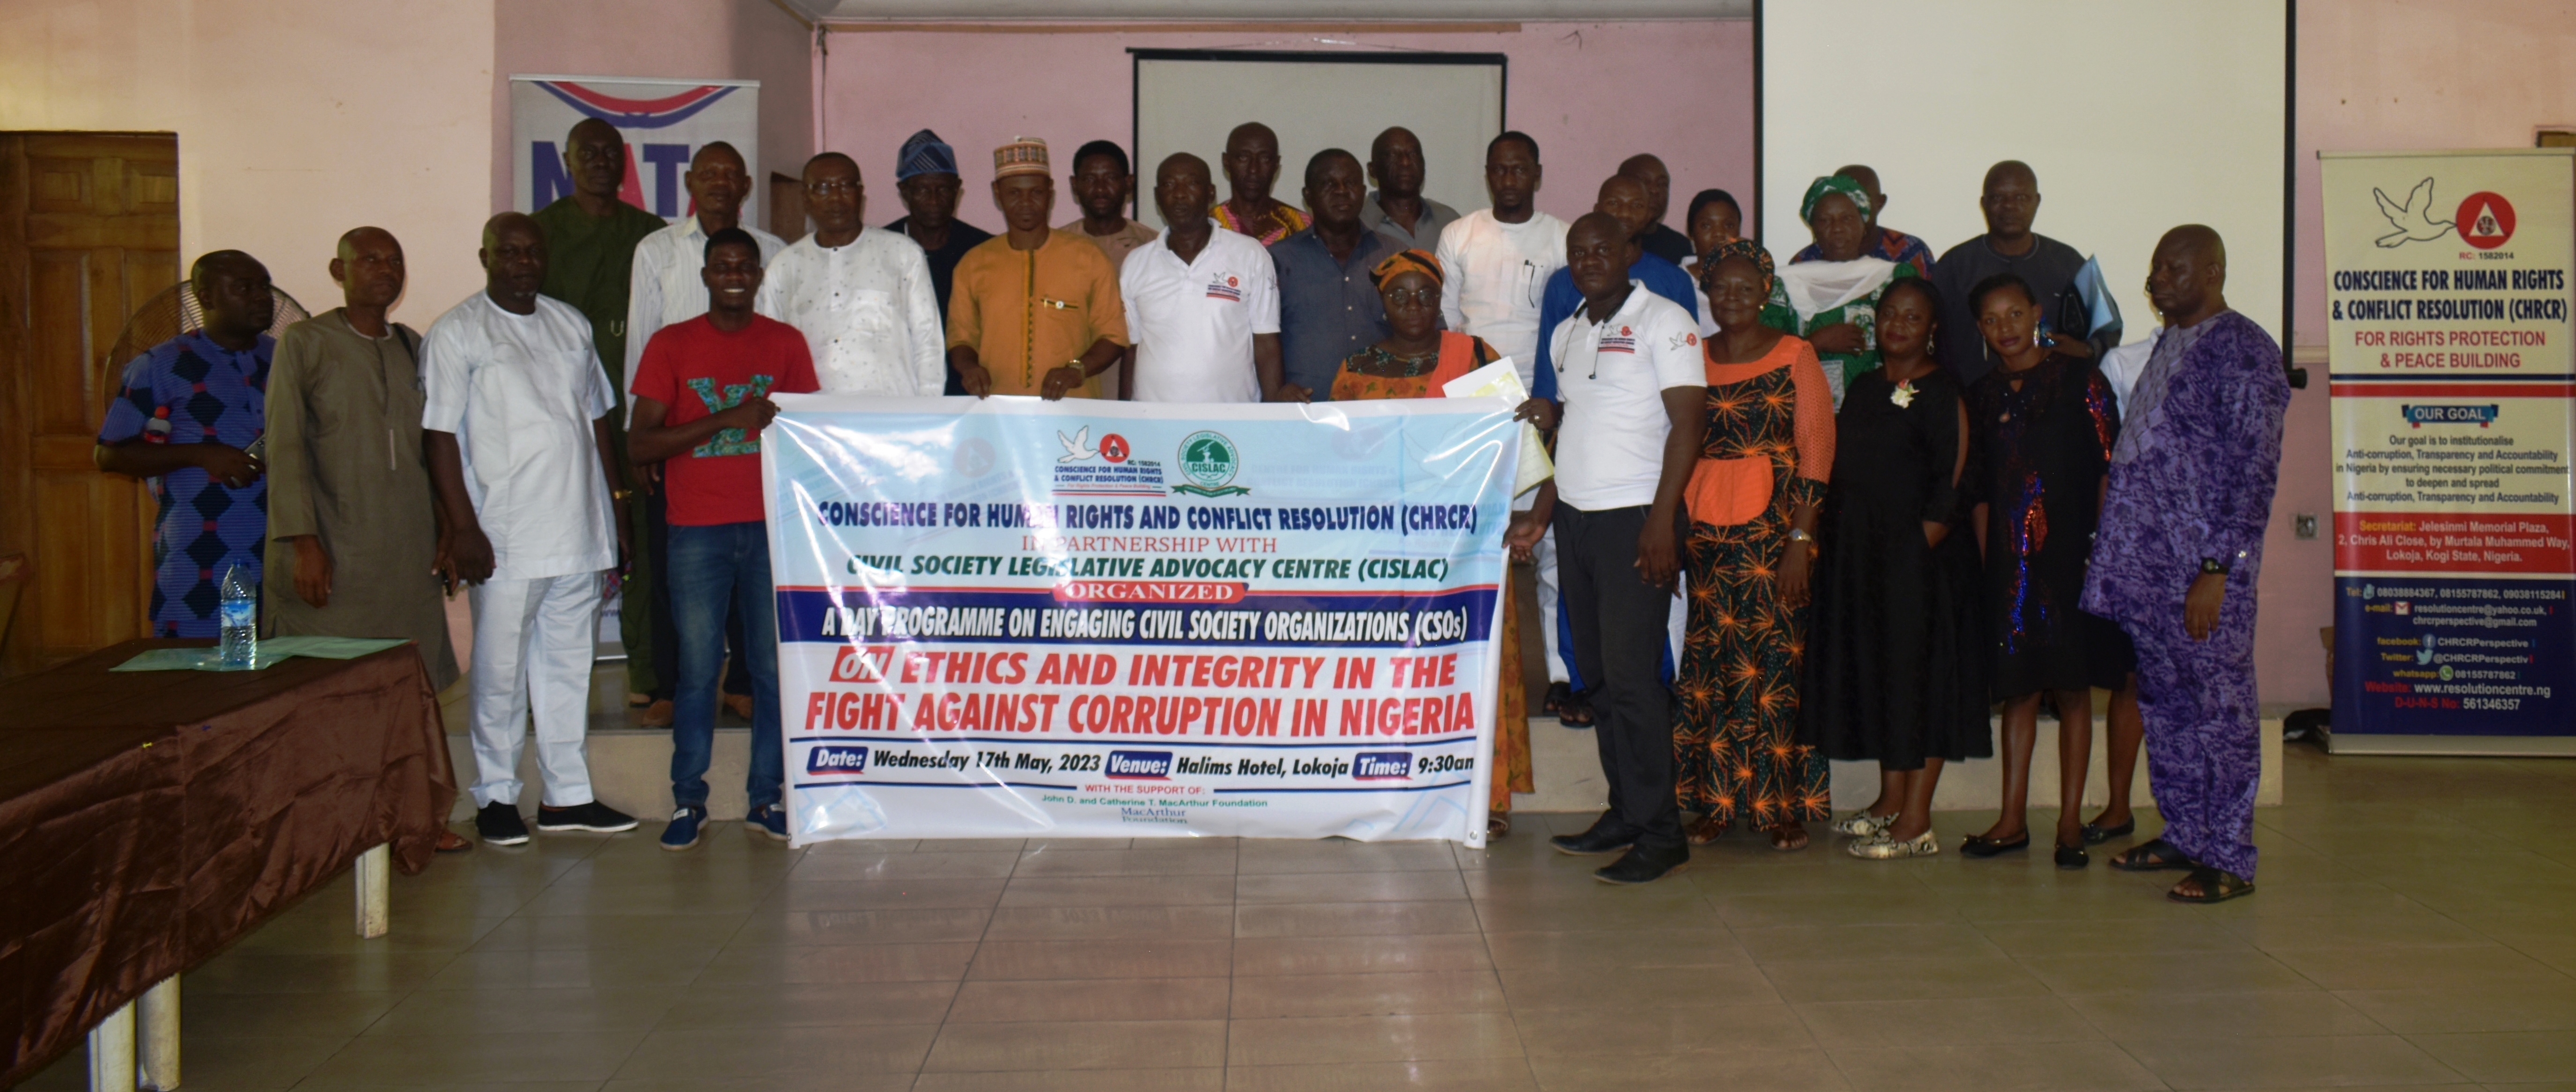 One Day Program for Civil Society Organizations (CSOs) on Ethics and Integrity in the Fight Against Corruption in Nigeria